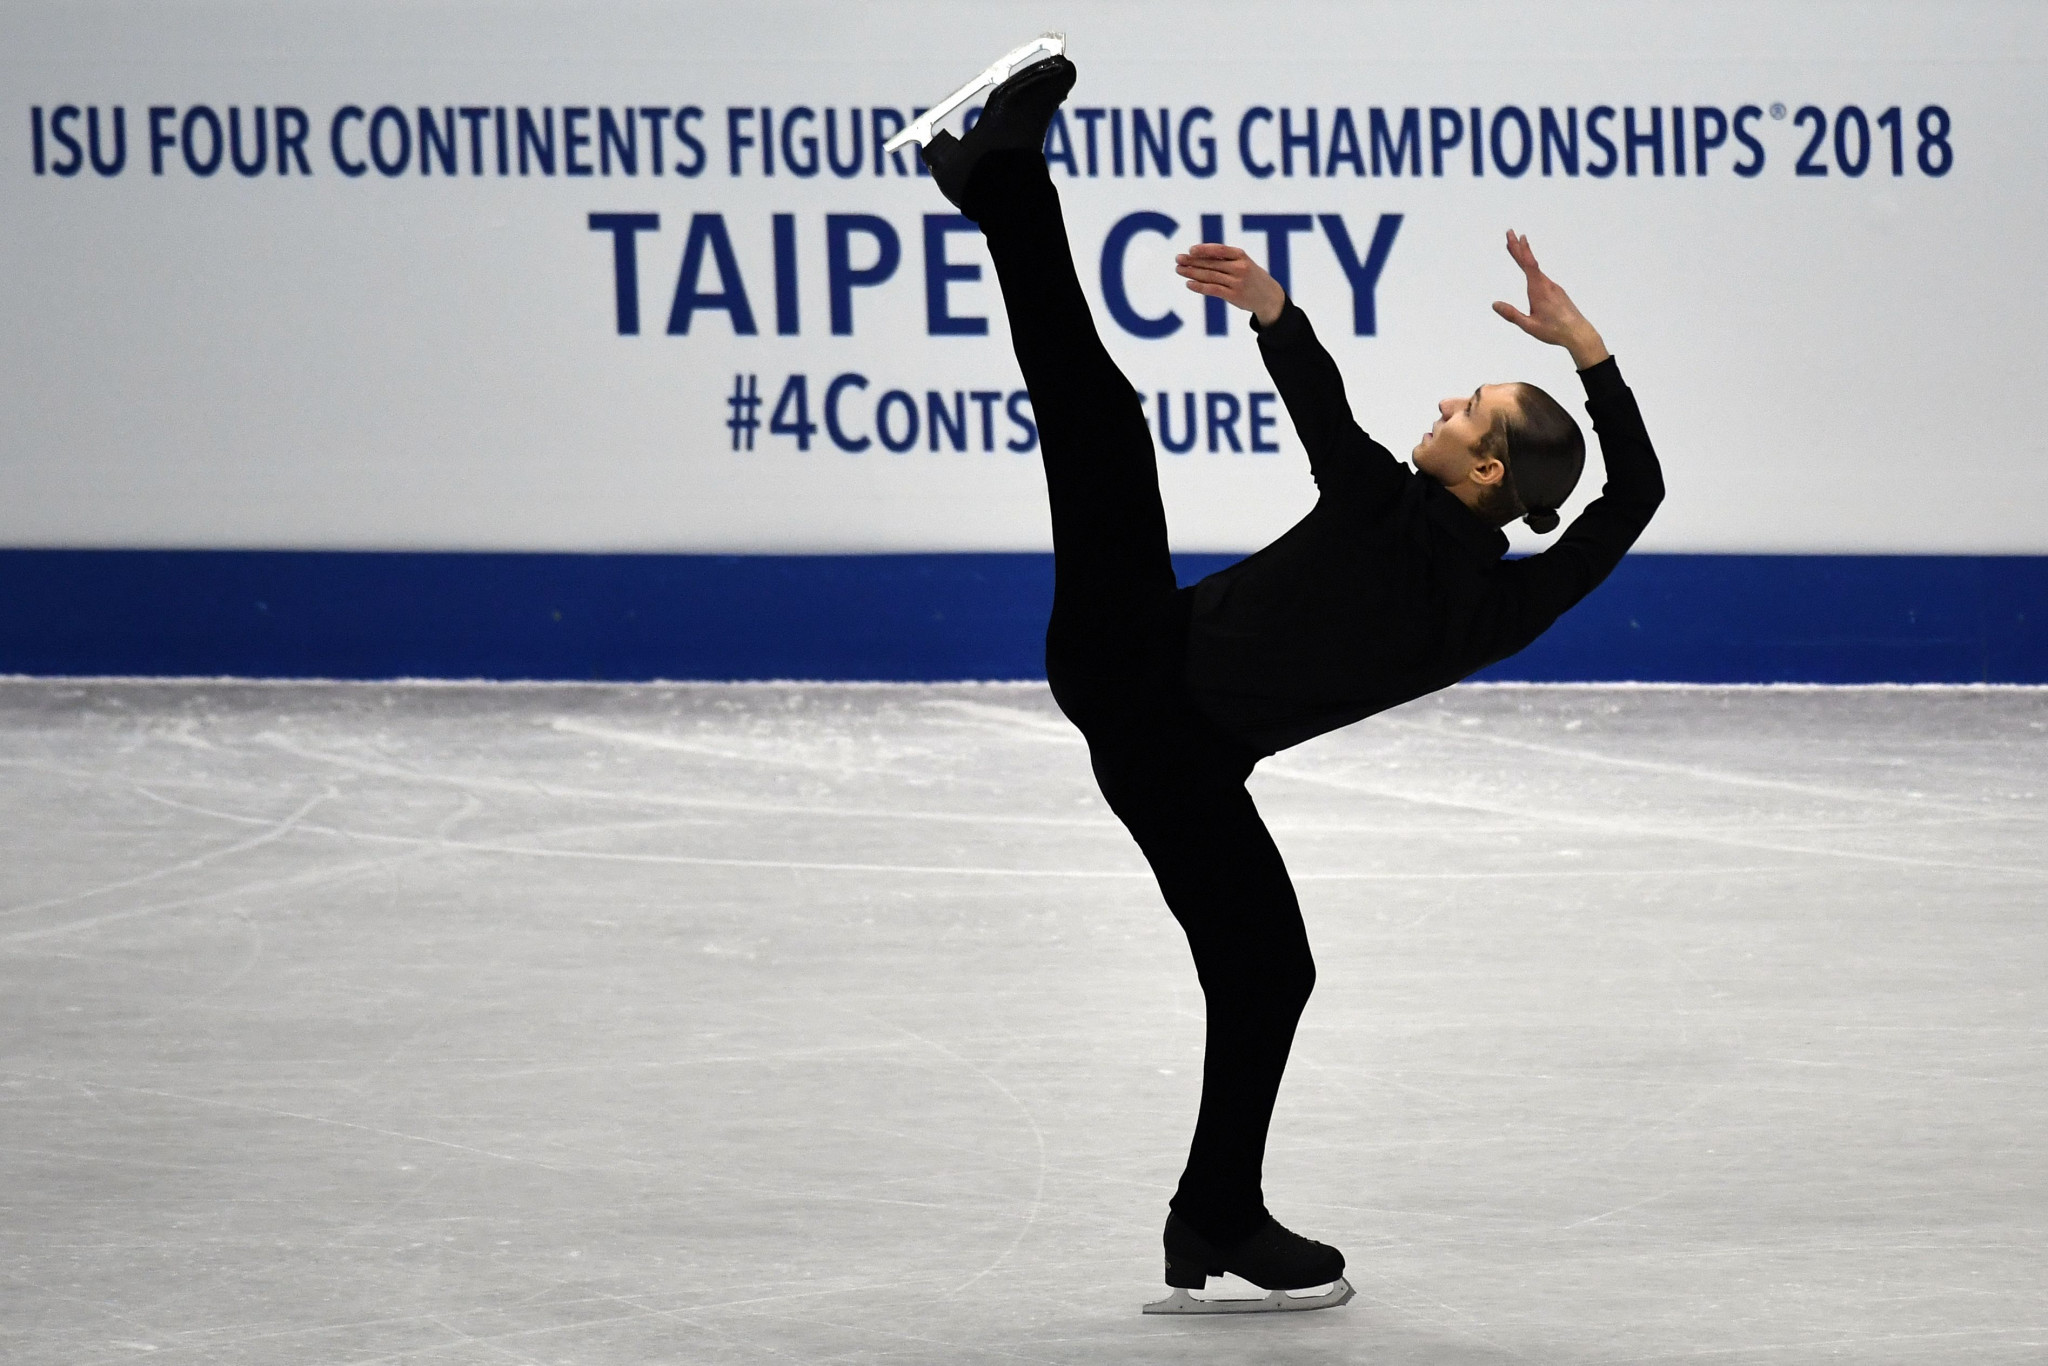 Jason Brown of the United States took bronze in the men's competition at the ISU Four Continents Figure Skating Championships in Taipei ©Getty Images